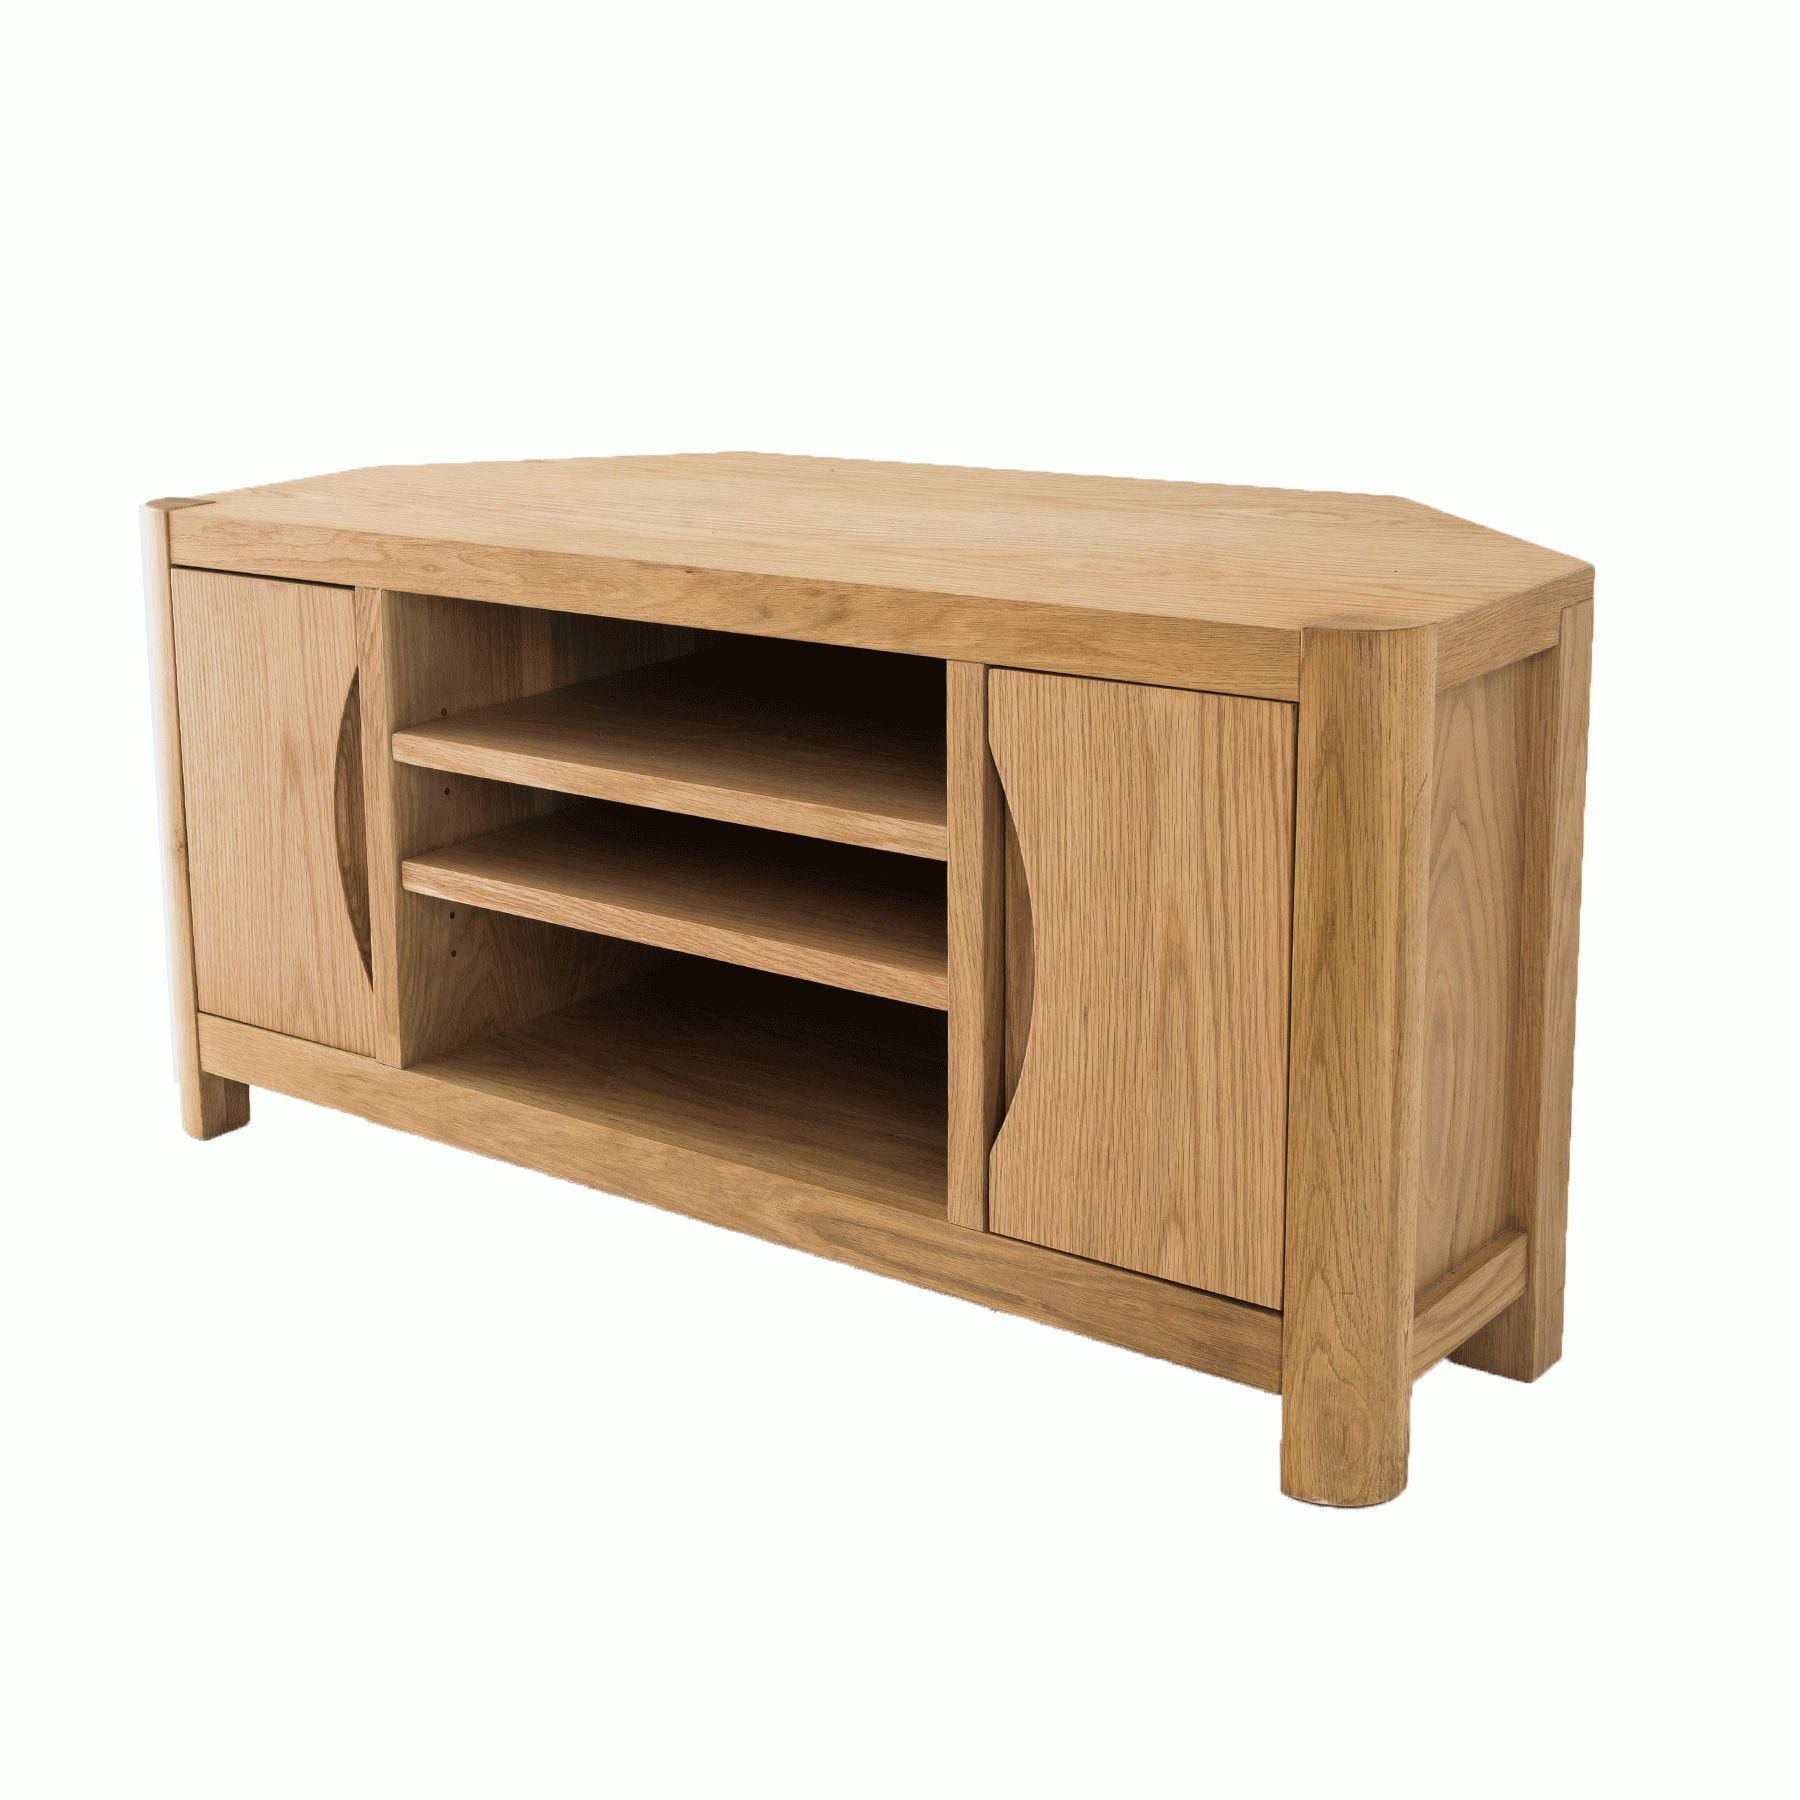 Oslo Light Oak Corner Tv Stand For Up To 44" Tvs In Well Known Light Oak Corner Tv Cabinets (View 5 of 20)